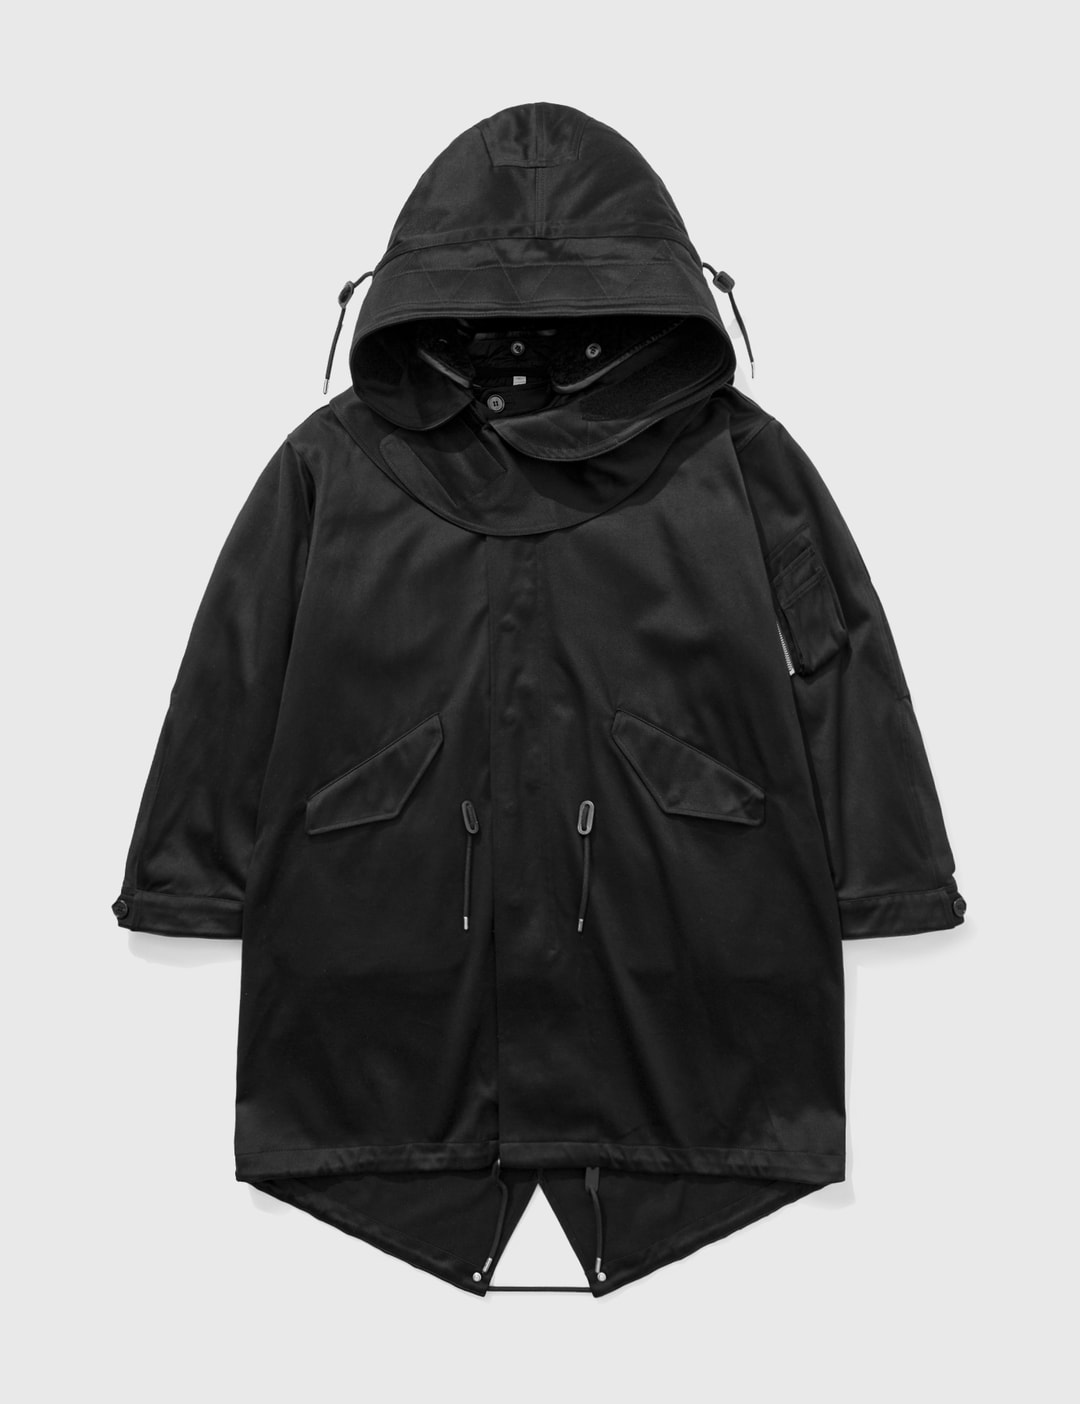 Burberry - Caldbeck Logo Jacket | HBX - Globally Curated Fashion and ...